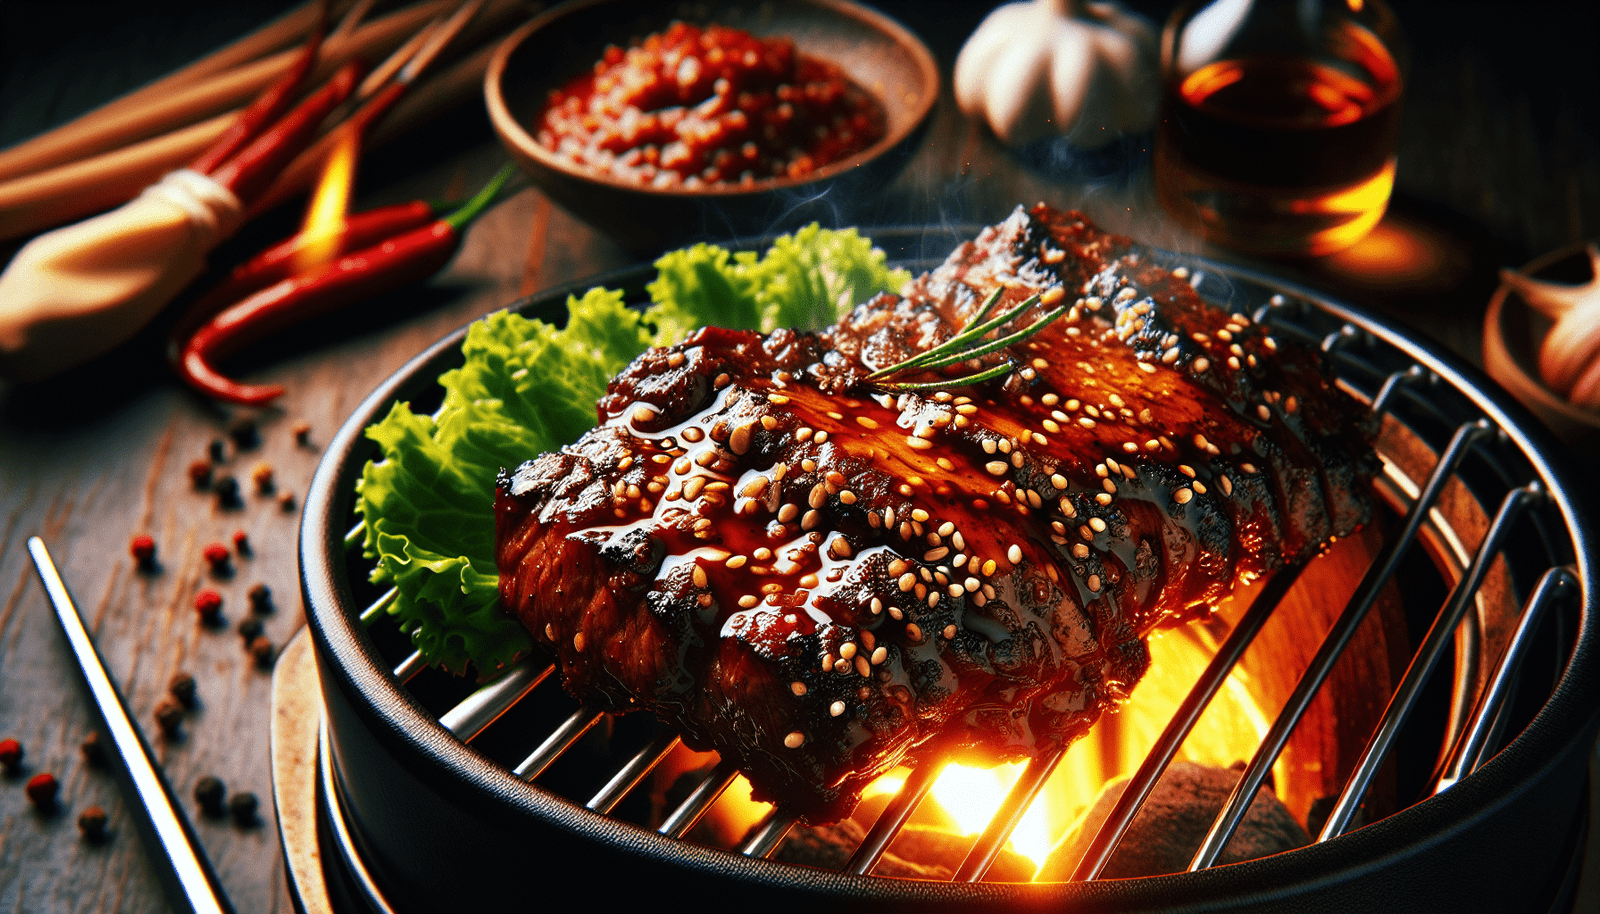 What Are Some Cutting-edge Techniques For Marinating And Grilling Meat Korean-style?